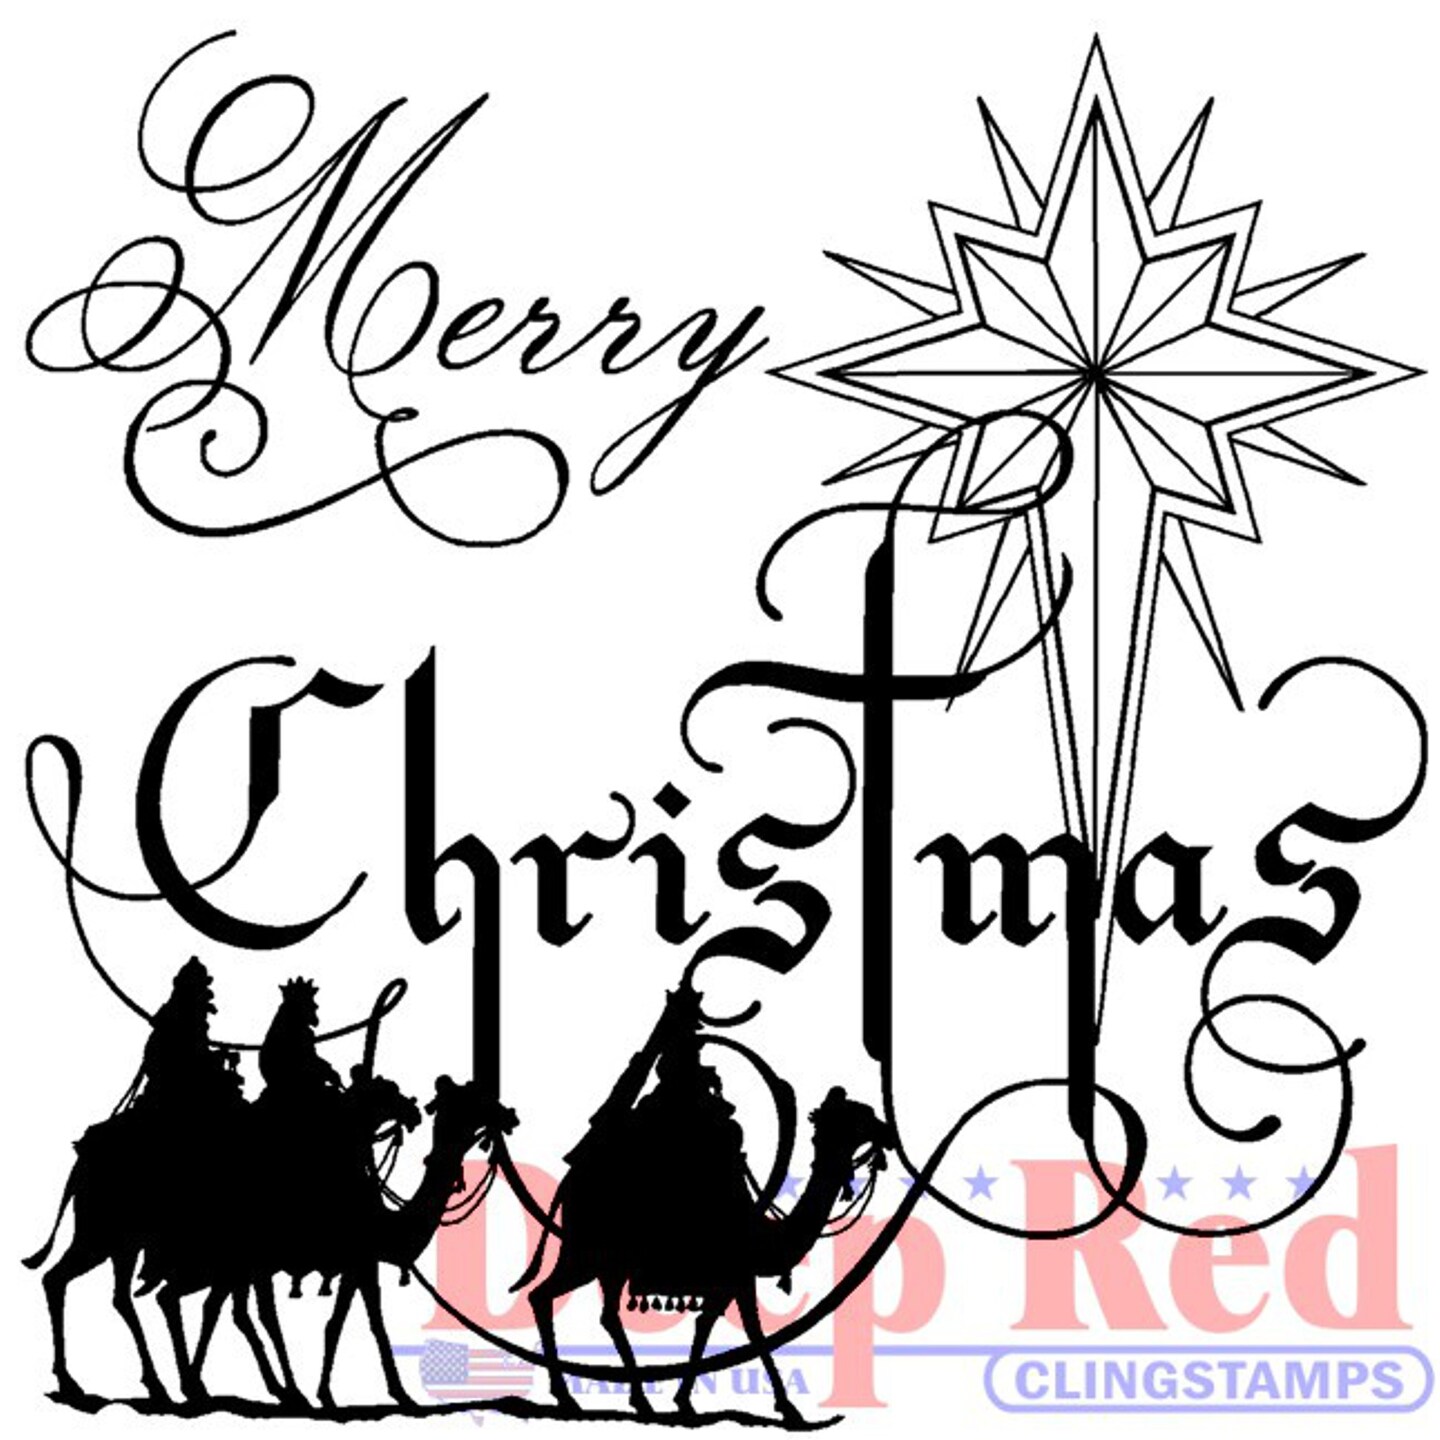 Deep Red Stamps Wise Men Christmas Rubber Cling Stamp 2.1 x 2 inches